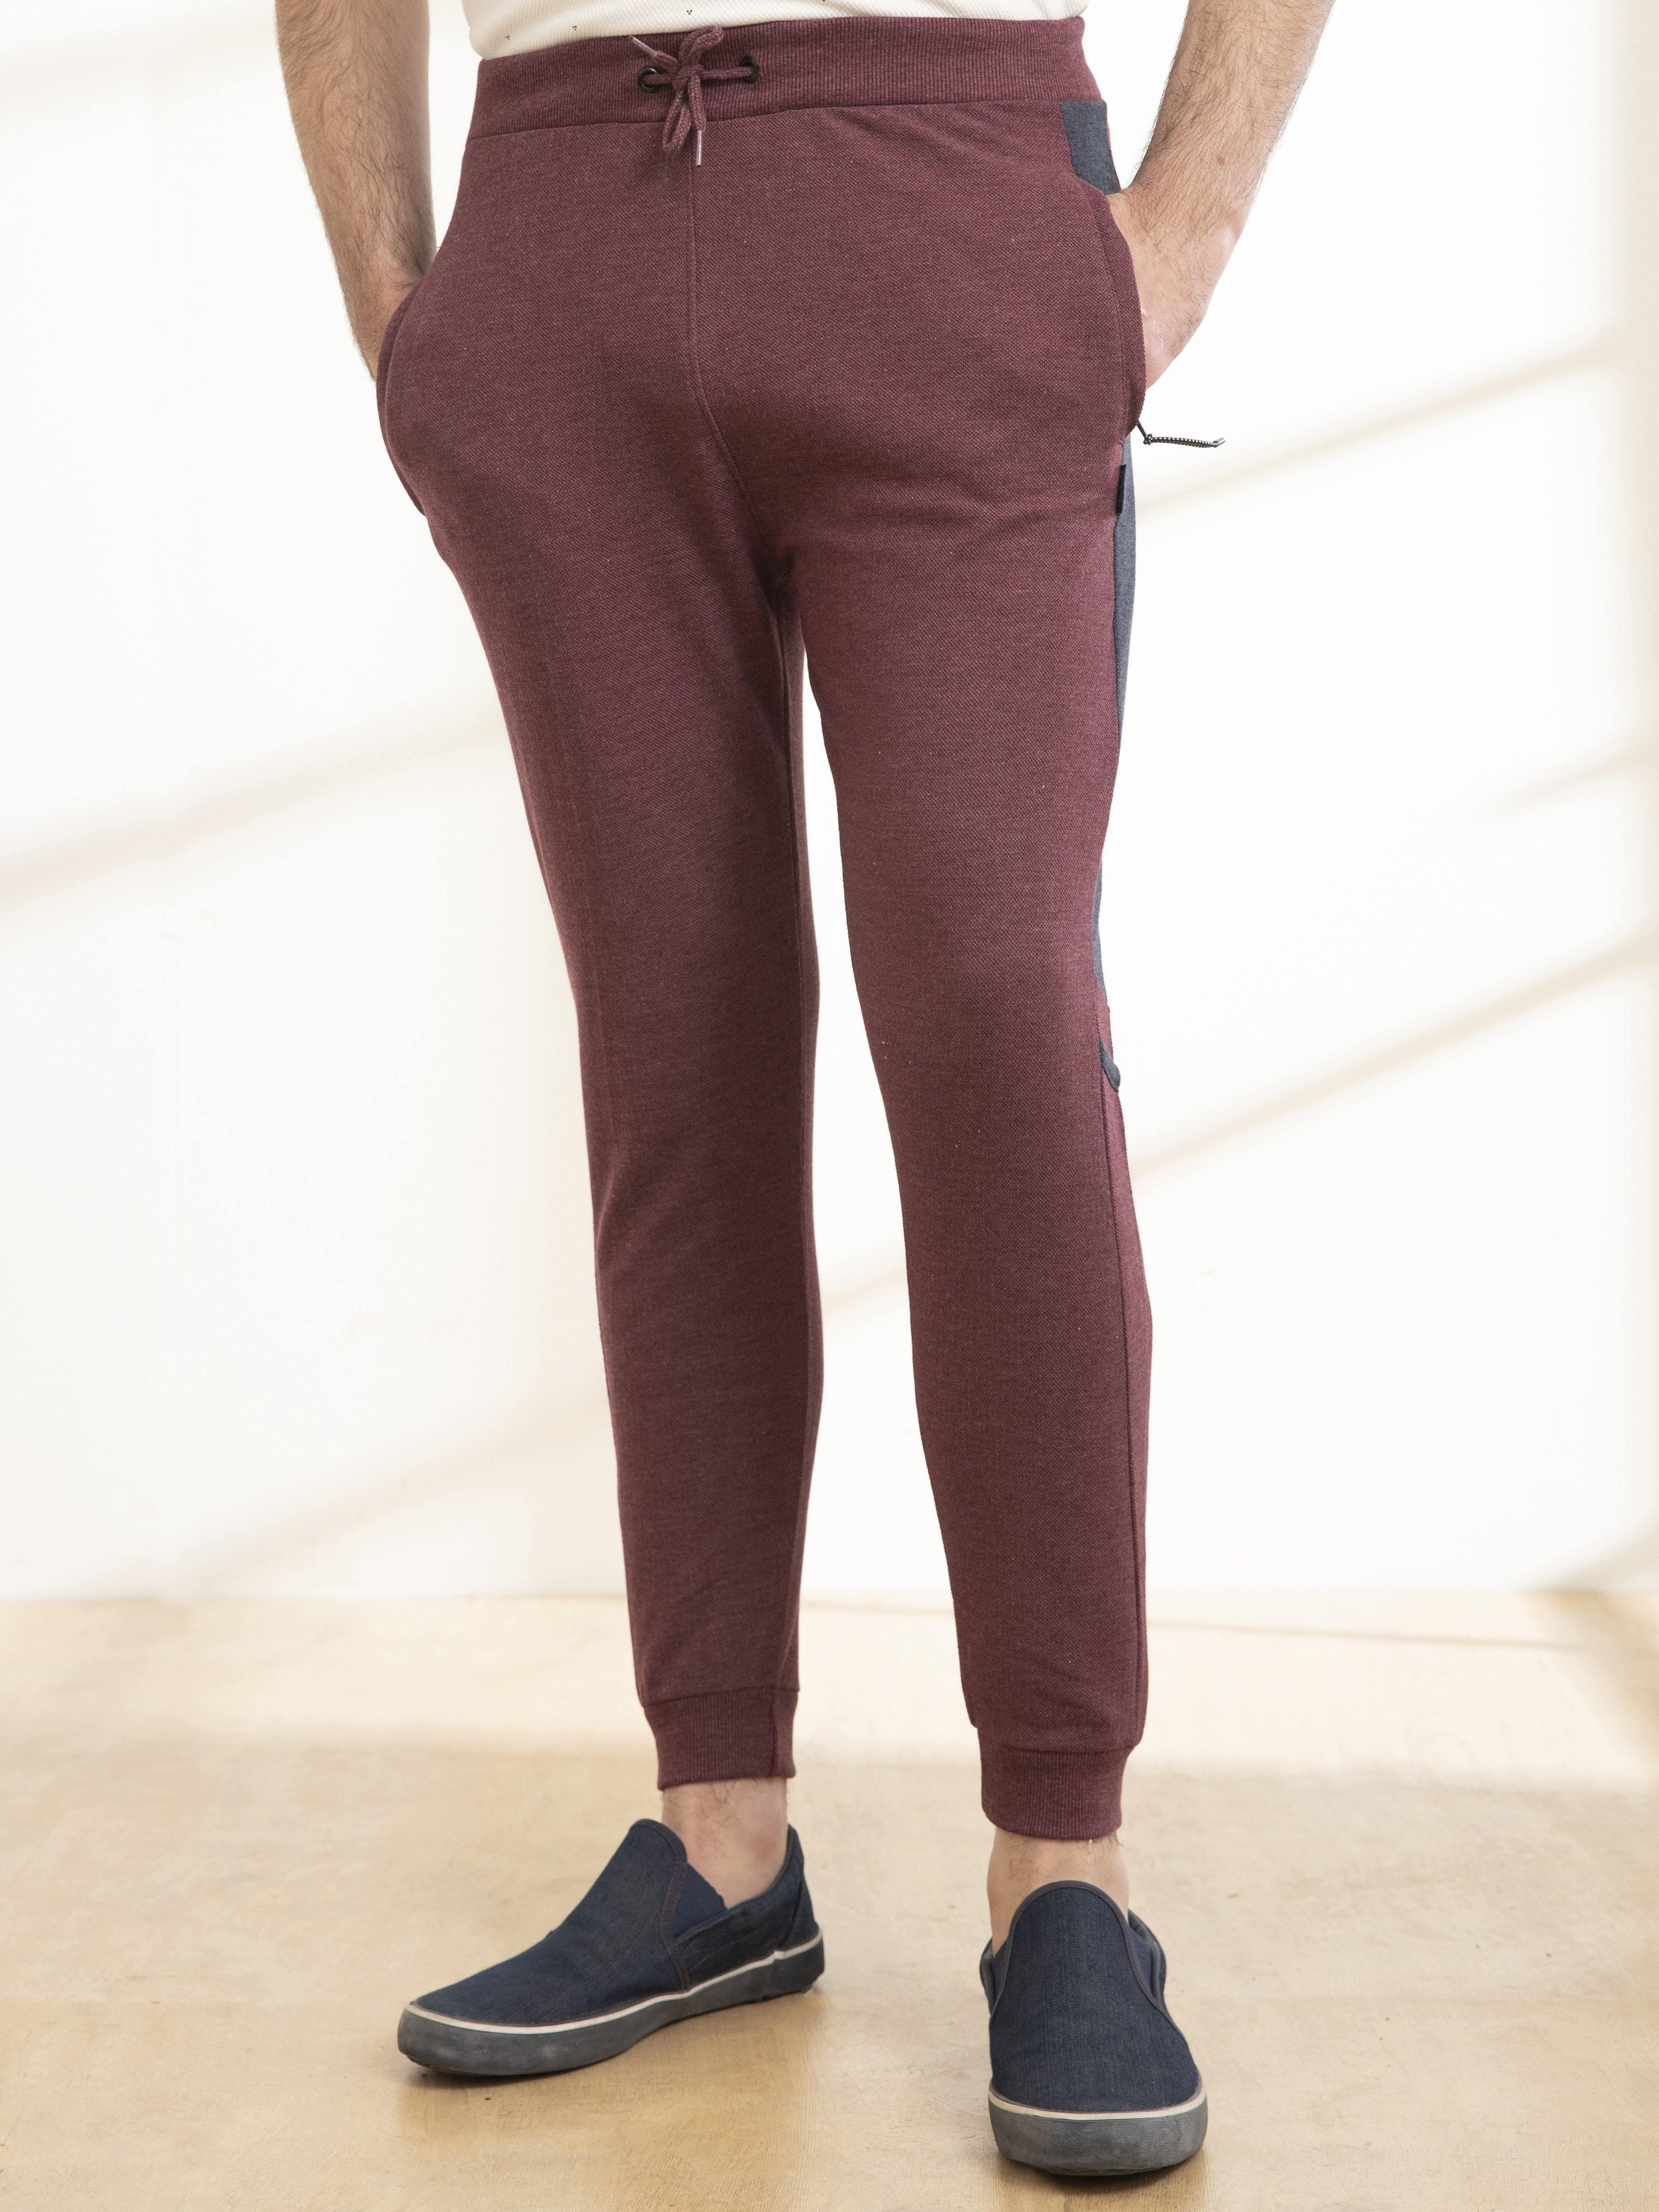 CASUAL TROUSER PIQUE TERRY MAROON MELANGE at Charcoal Clothing